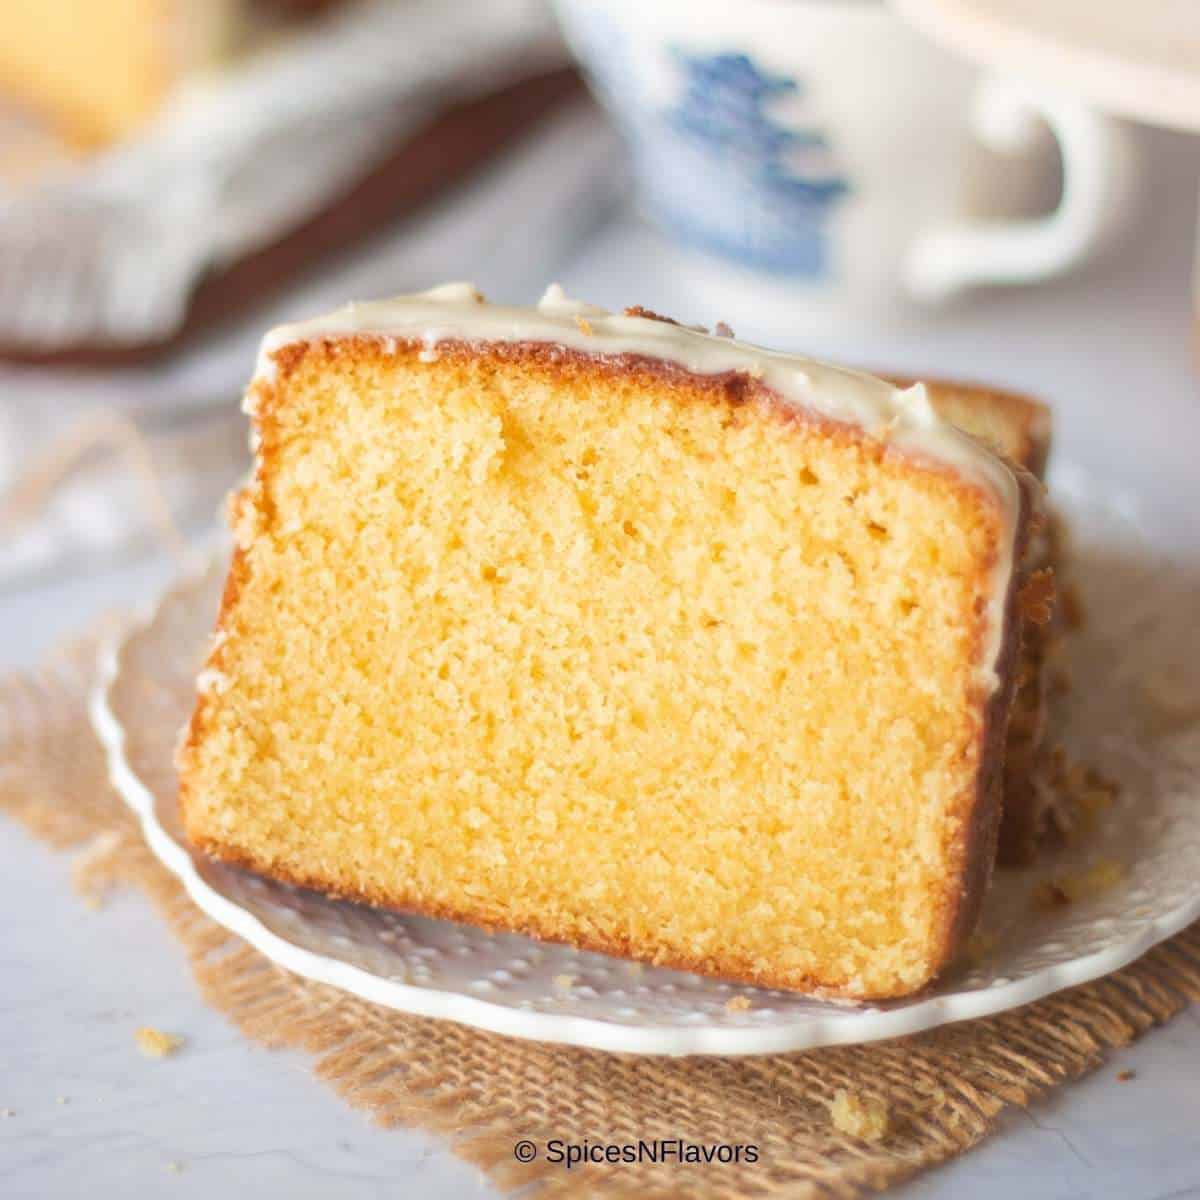 cropped image of pound cake slice to show the texture clearly